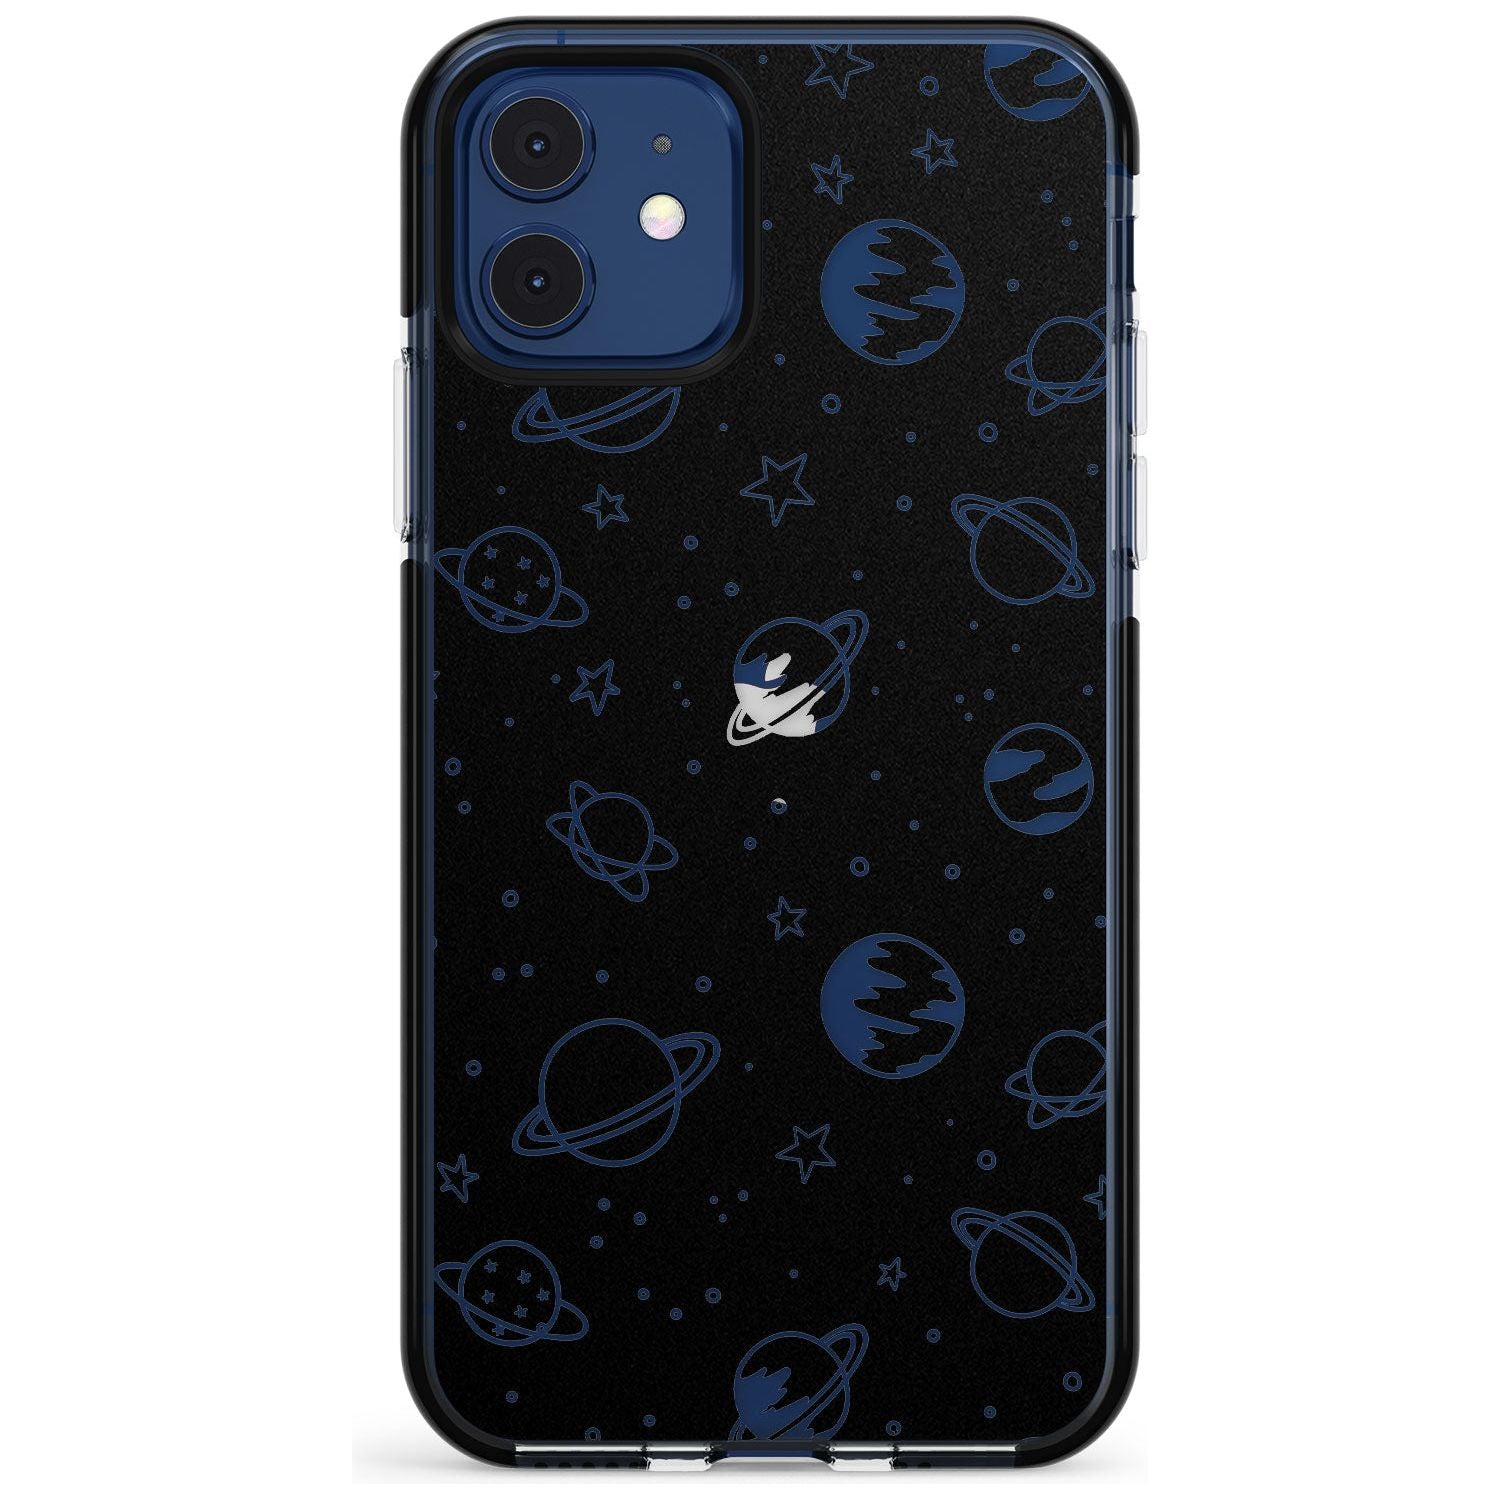 Outer Space Outlines: Clear on Black Pink Fade Impact Phone Case for iPhone 11 Pro Max